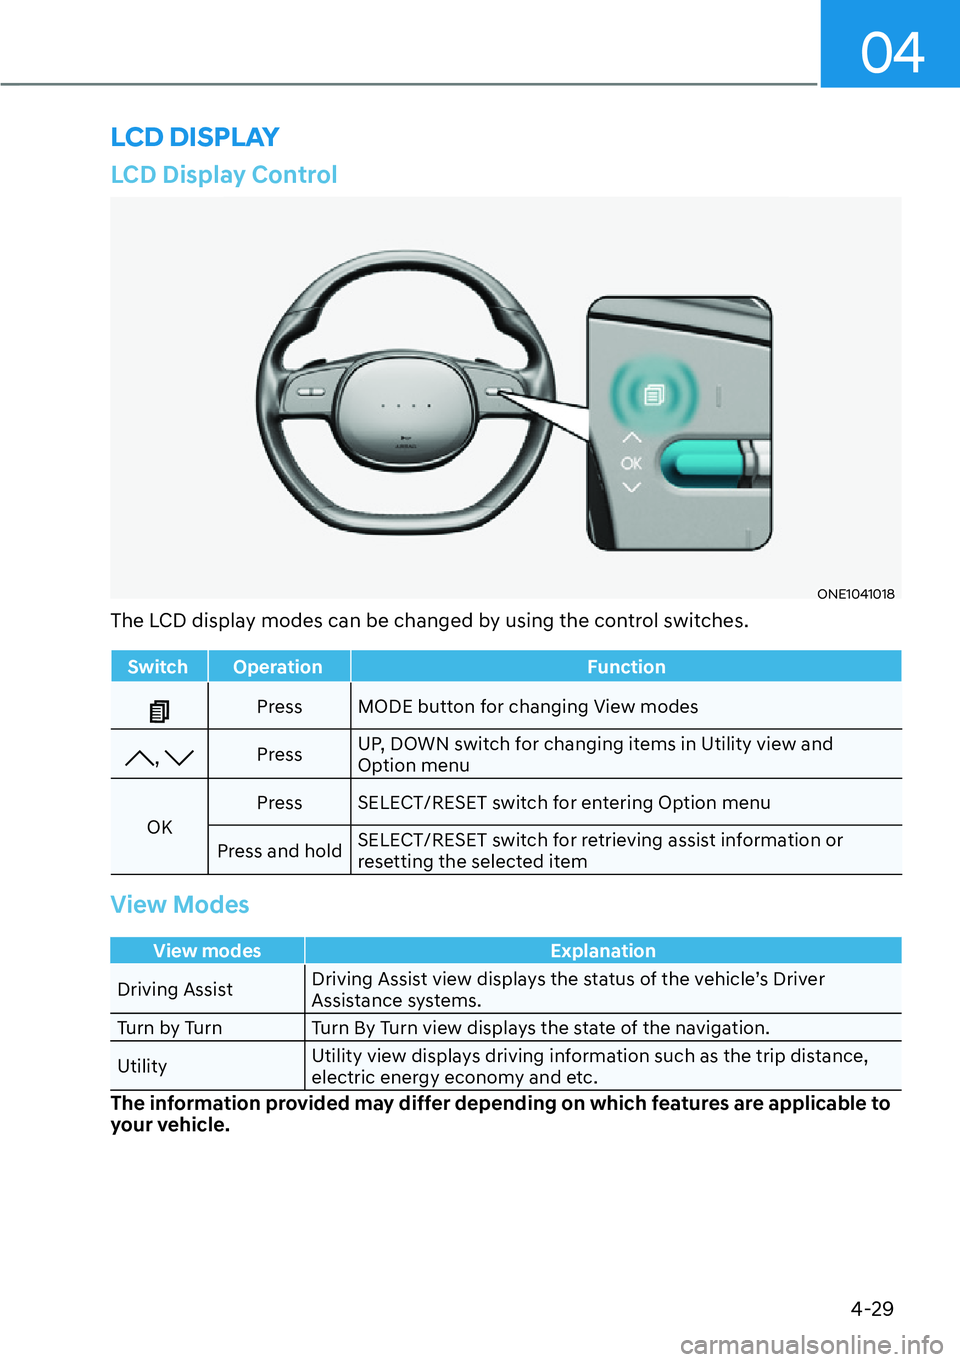 HYUNDAI IONIQ 5 2022  Owners Manual 04
4-29
LCD Display Control
ONE1041018
The LCD display modes can be changed by using the control switches.
Switch Operation Function
Press MODE button for changing View modes
, PressUP, DOWN switch fo